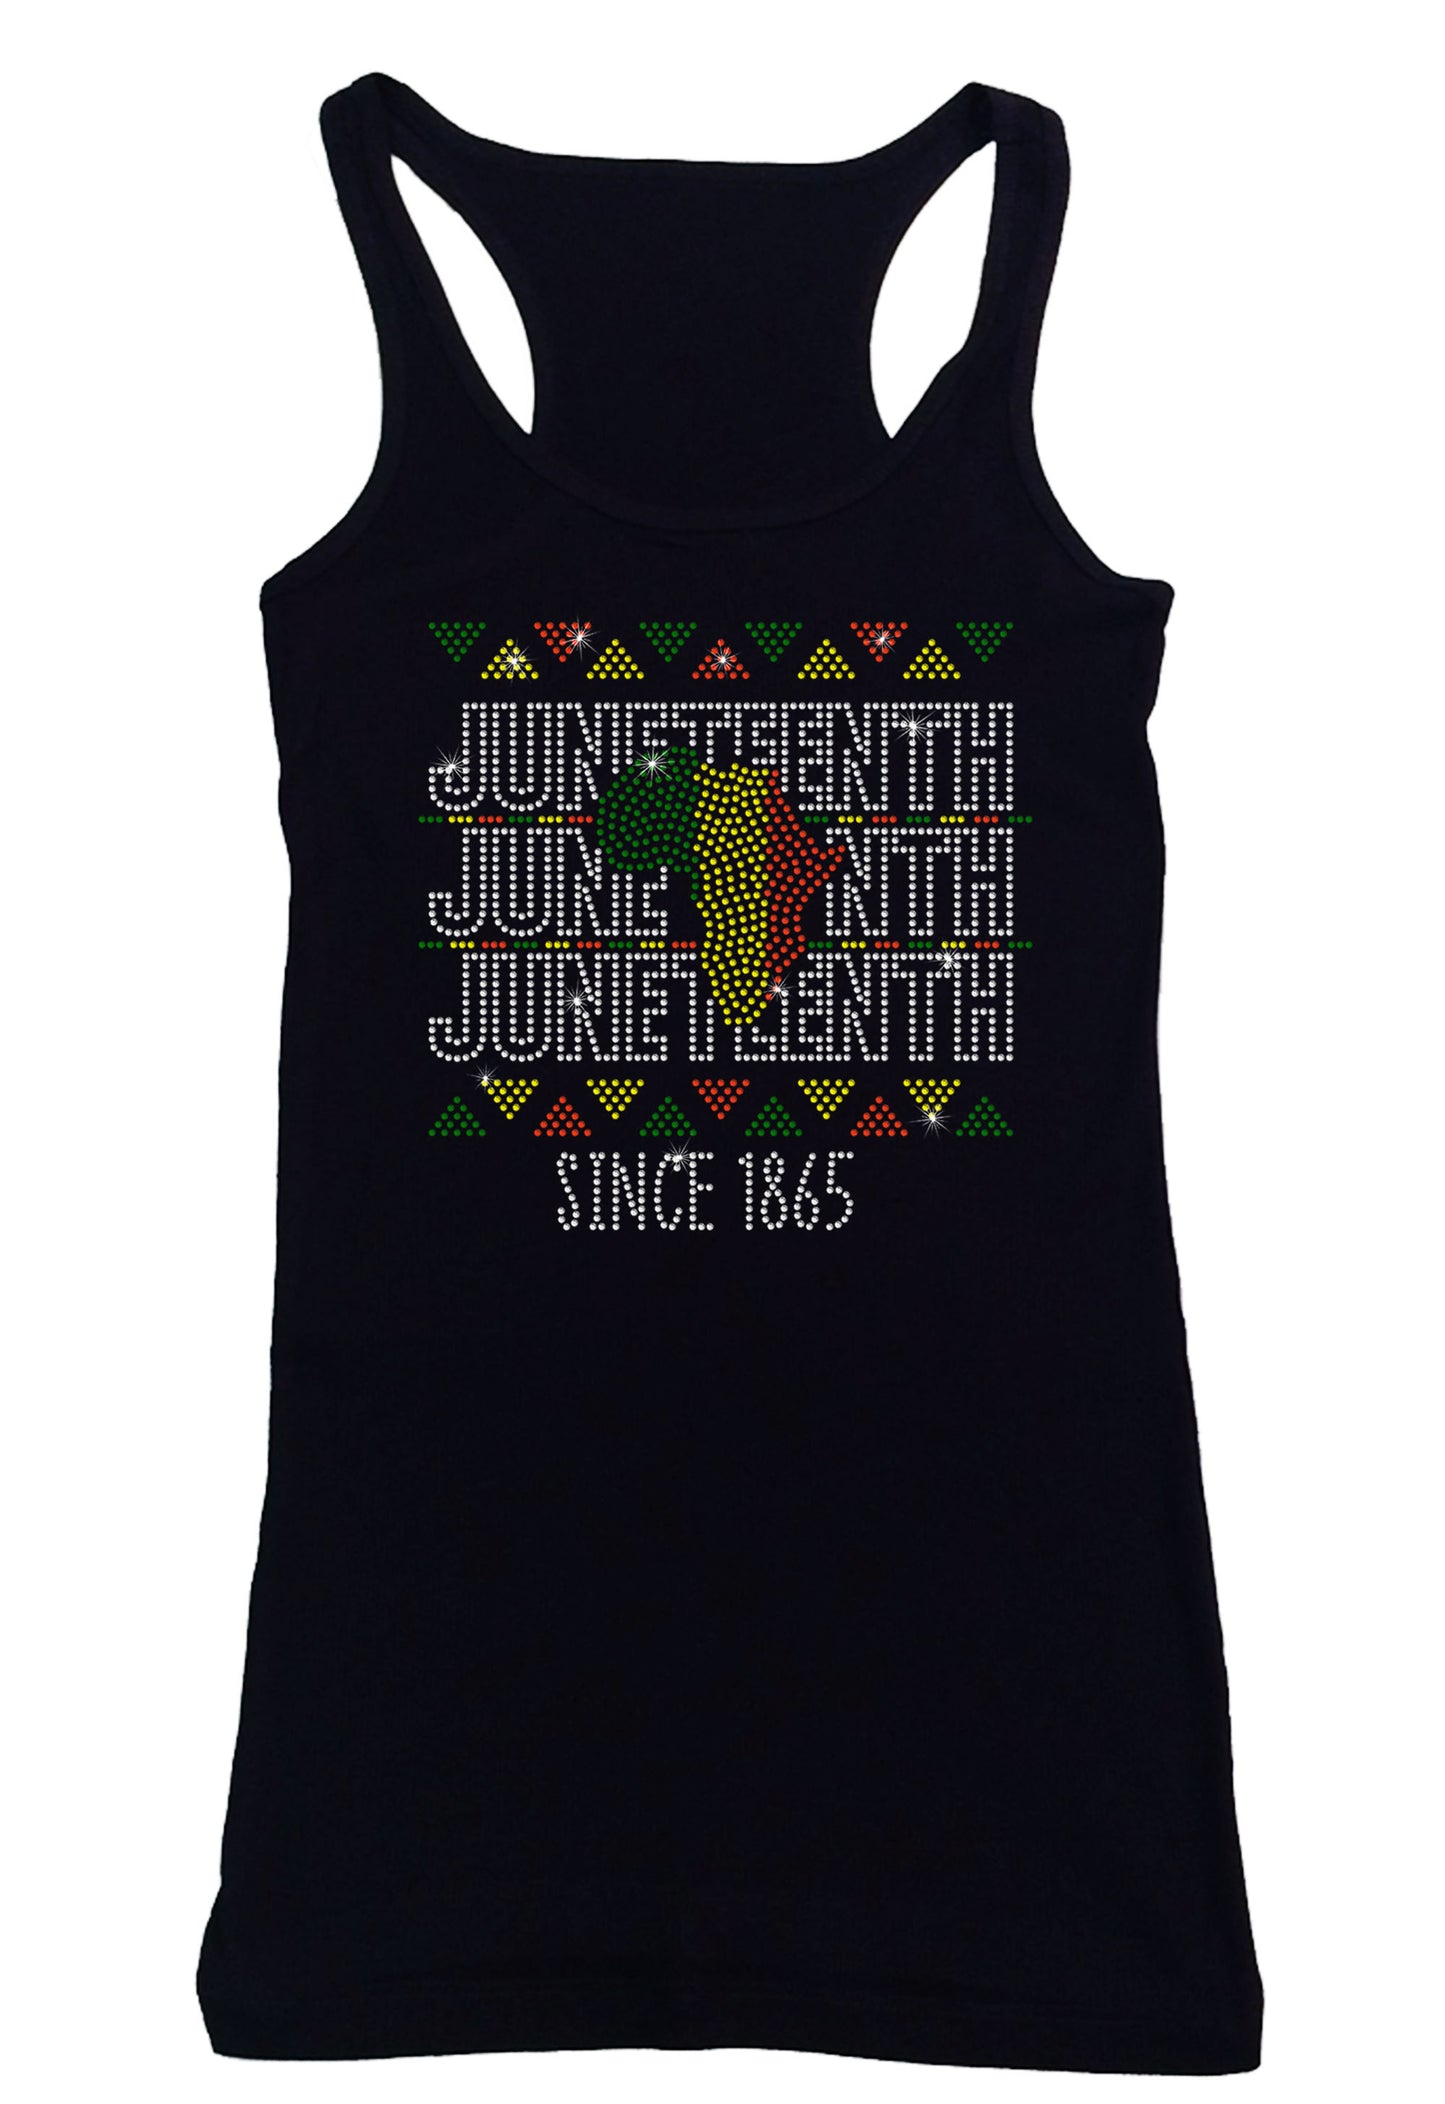 Women's Rhinestone Fitted Tight Snug Juneteenth Since 1865 - with African Colors, Rhinestone Juneteenth Shirt